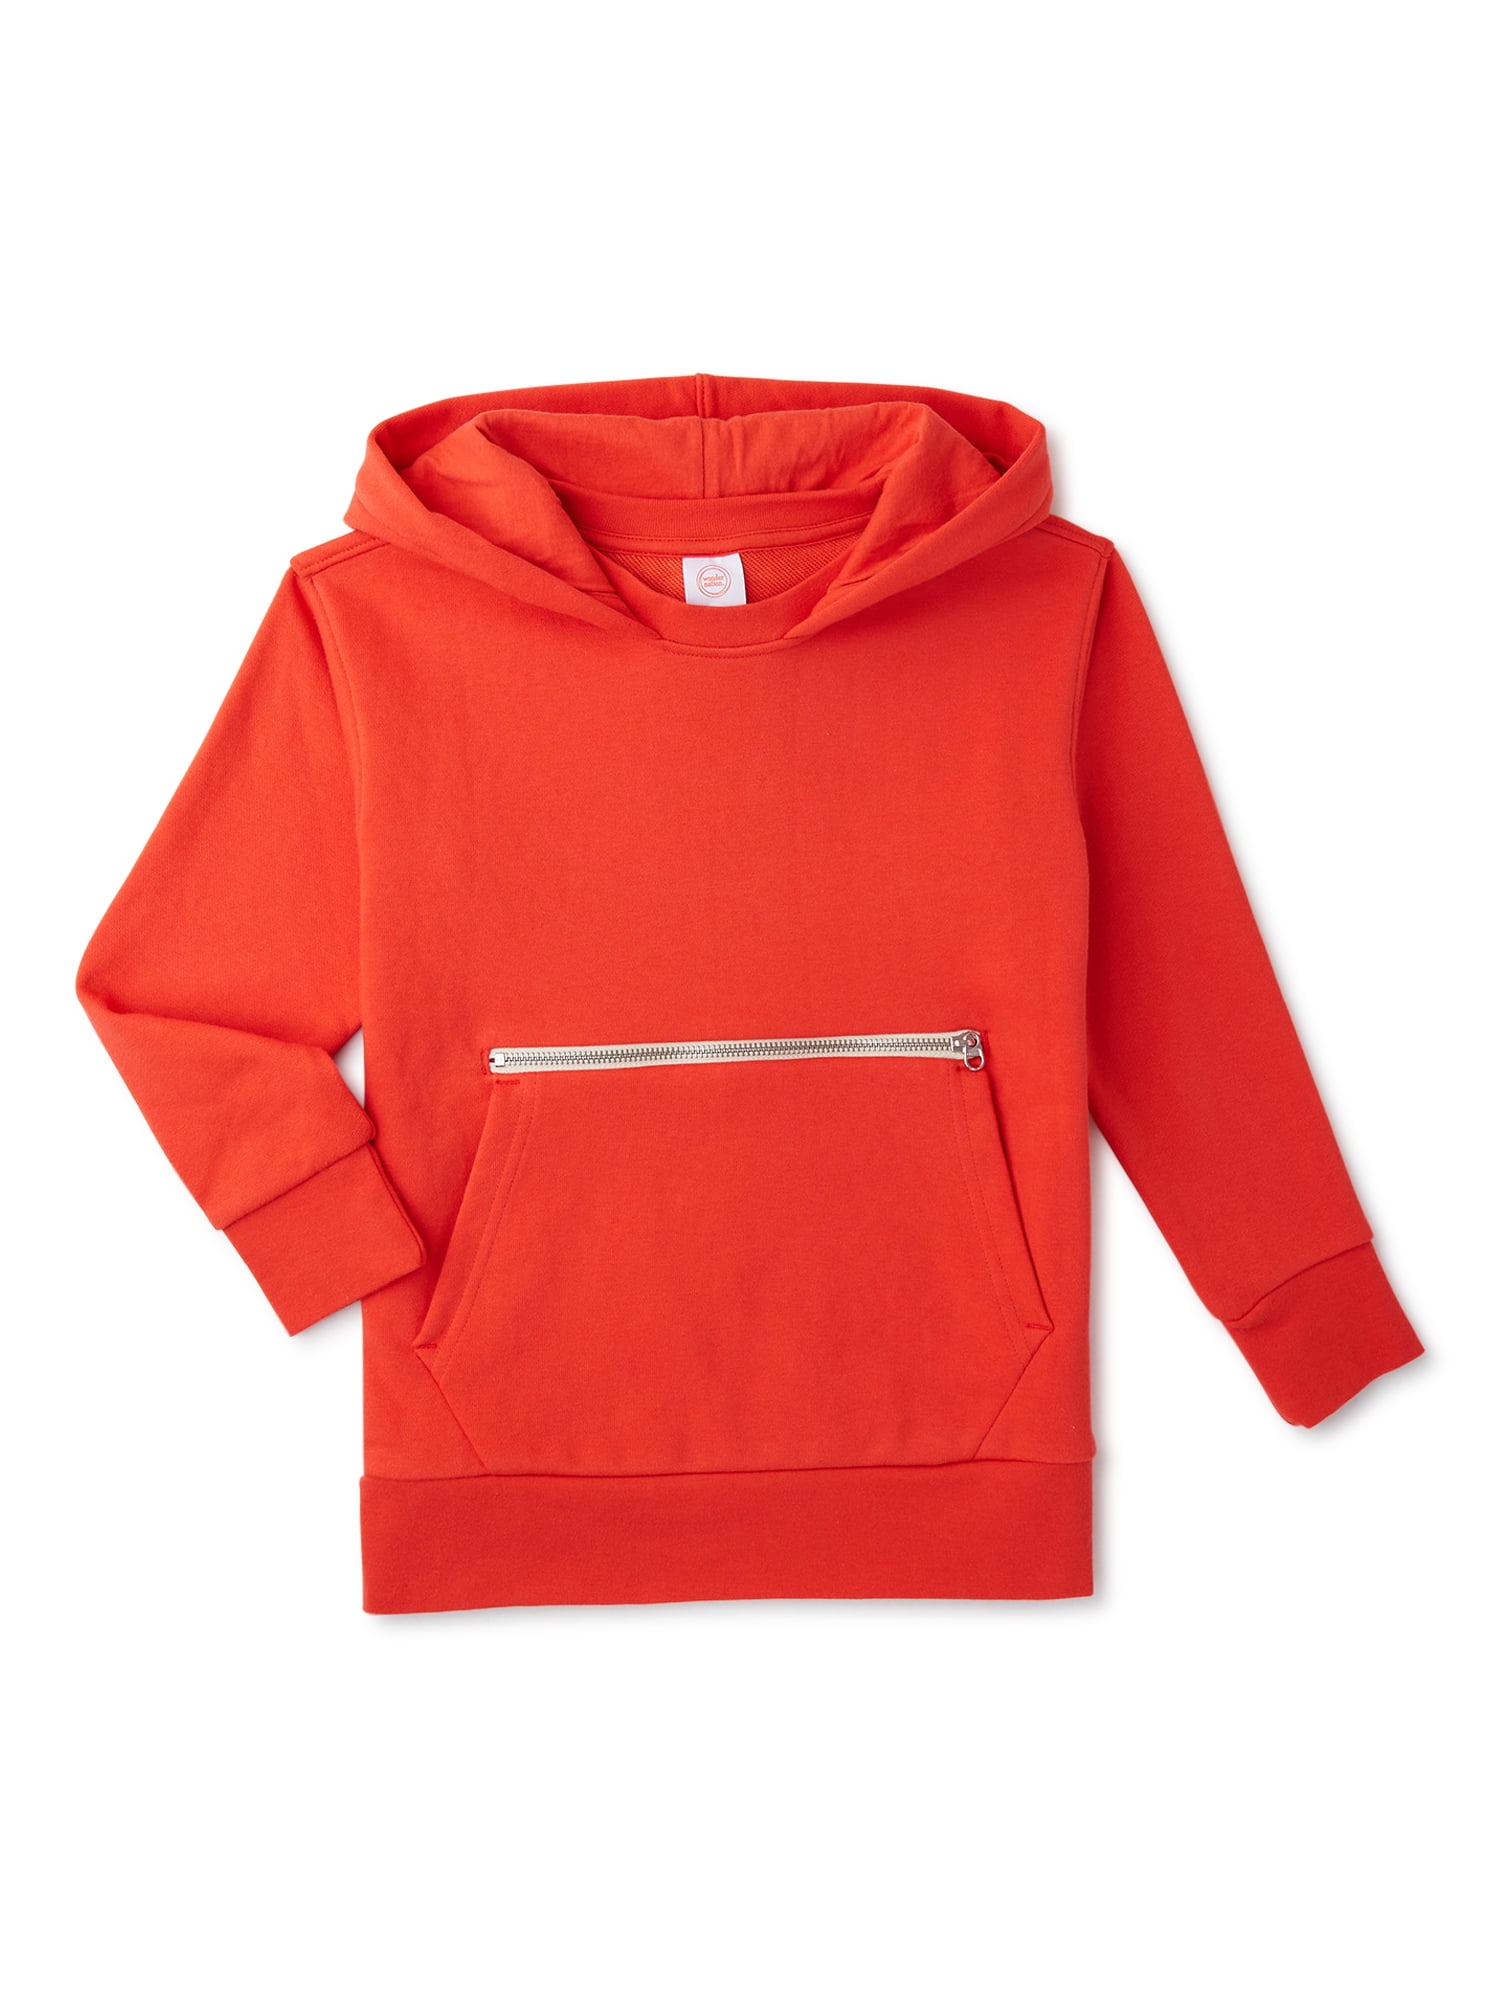 Wonder Nation Boys Long Sleeve Pullover Hoodie with Zip Pocket, Sizes 4-18 & Husky